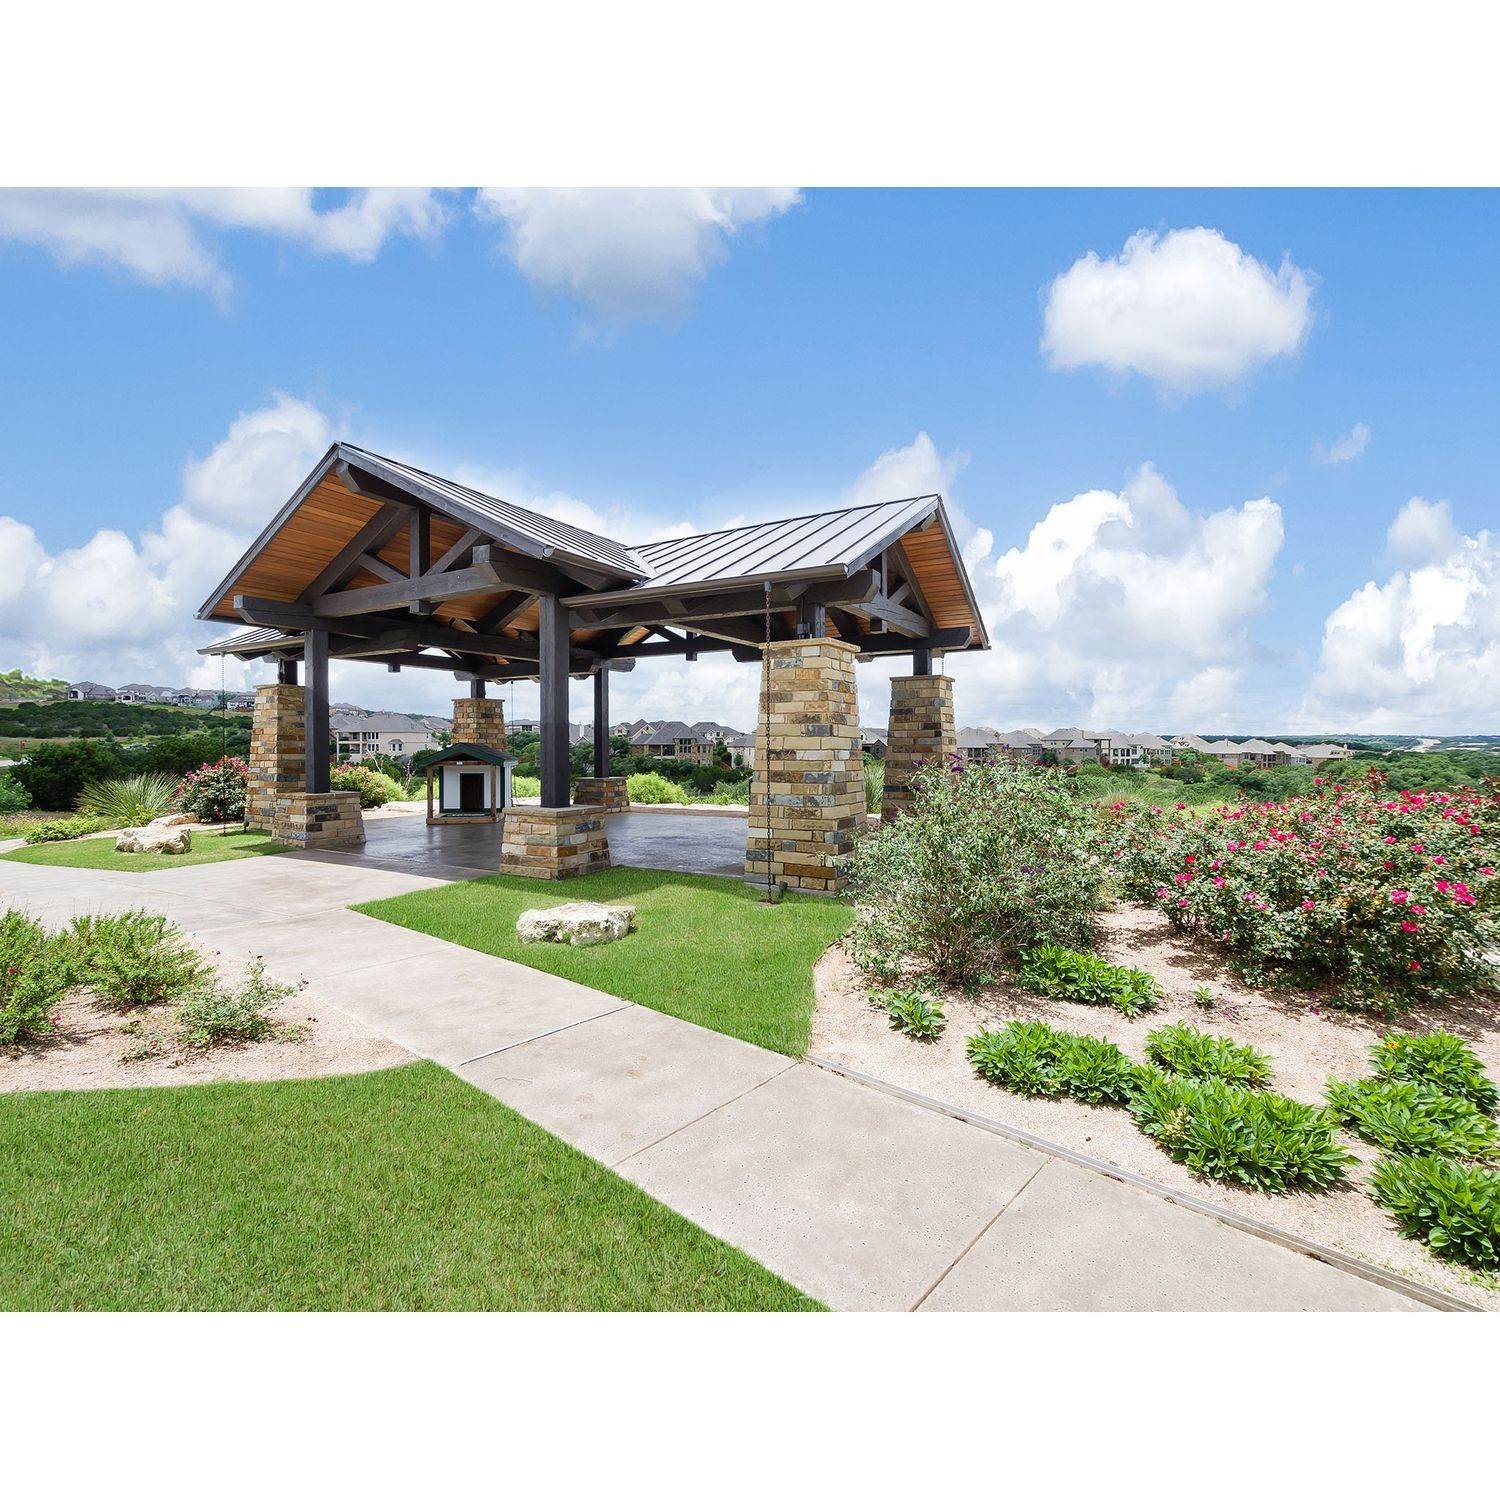 8. Sweetwater 60' xây dựng tại 6208 Bower Well Road, Austin, TX 78738